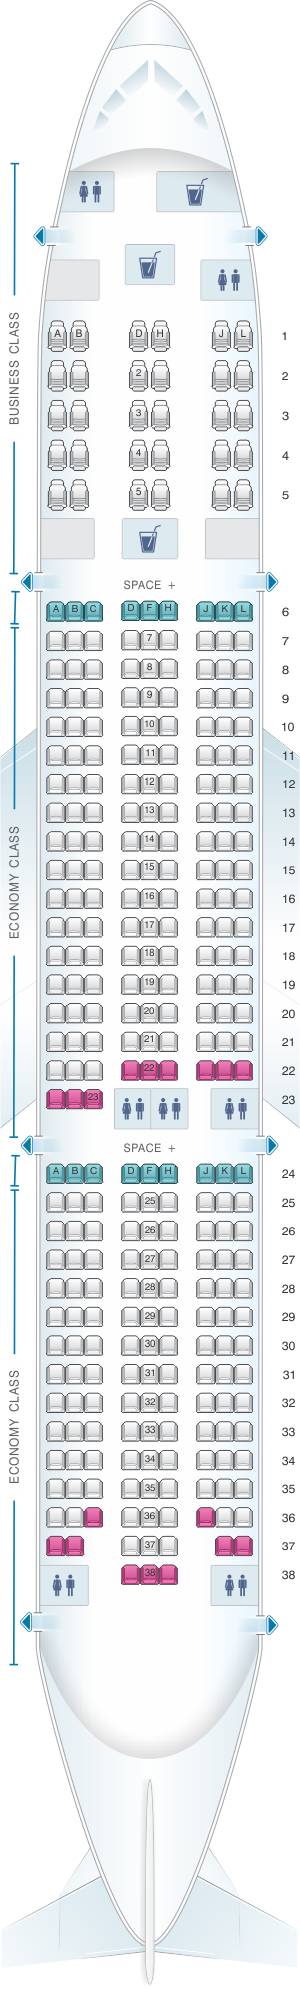 Seat map for LATAM Airlines Boeing B787-9